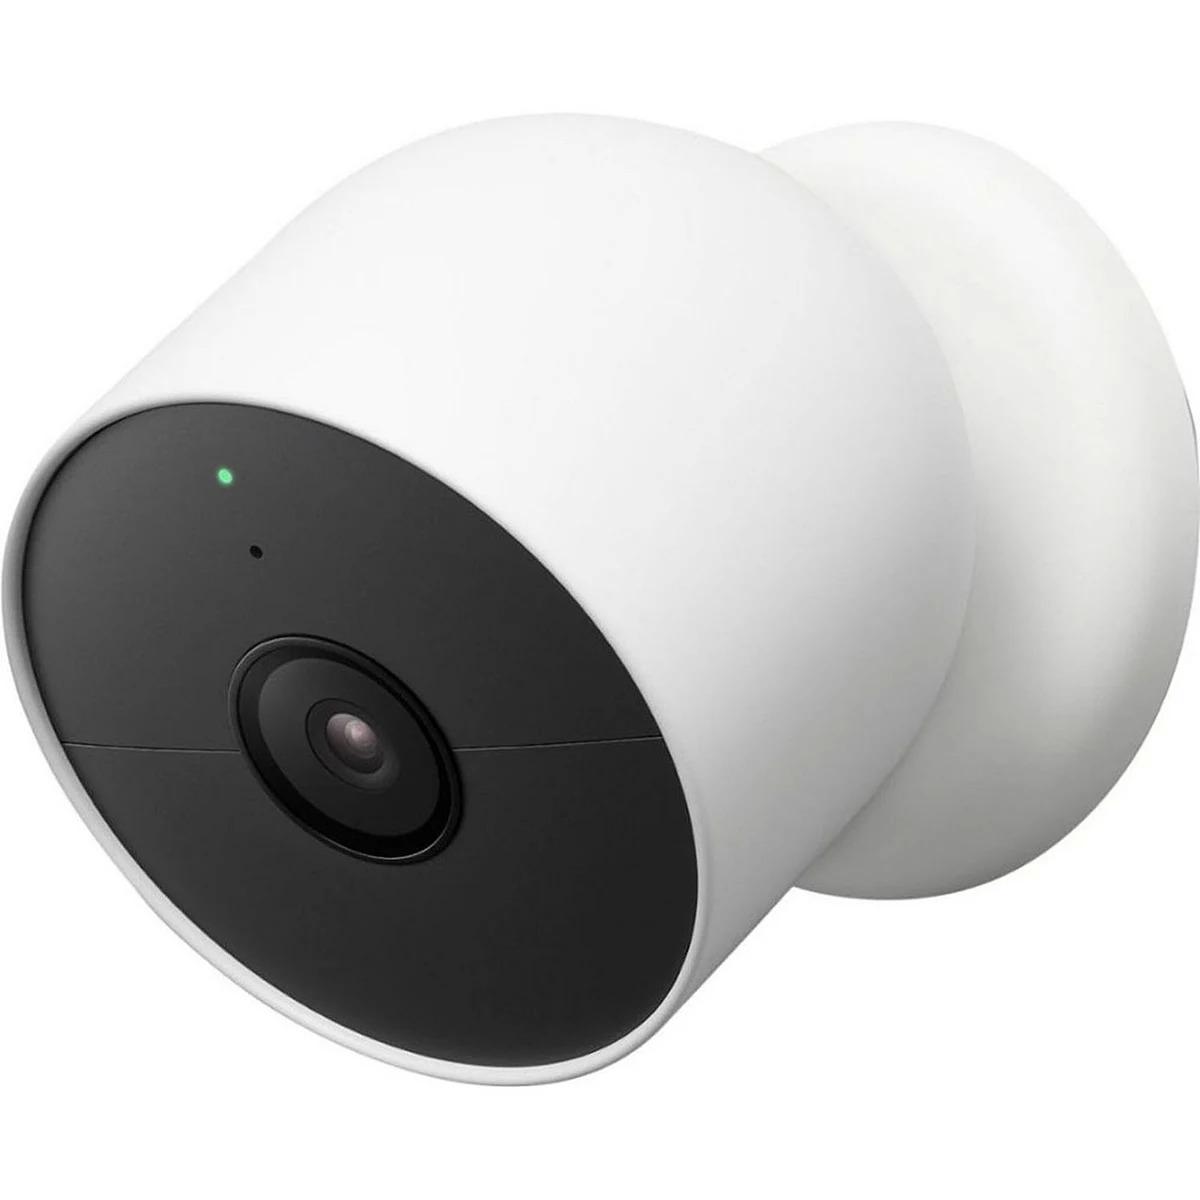 Google Nest Cam Security Camera with $45 Kohls Cash for $149.99 Shipped